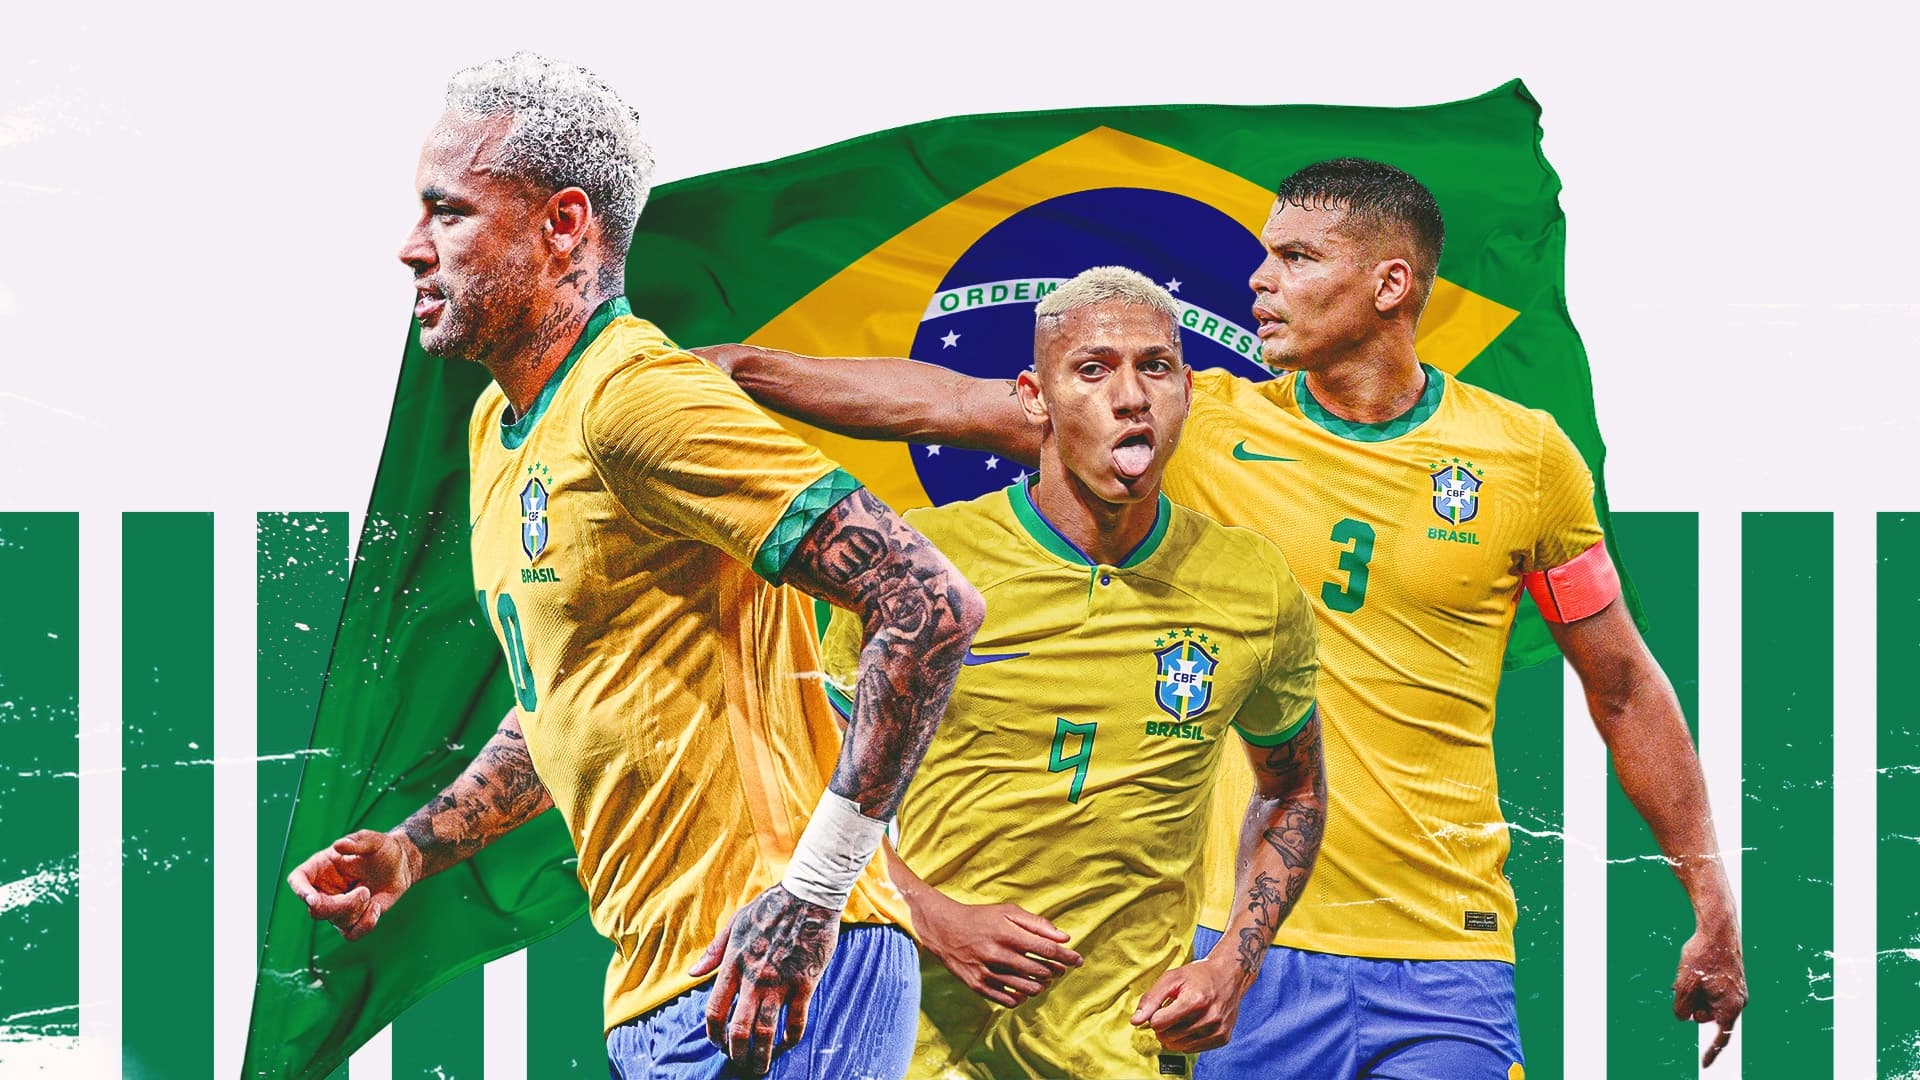 Brazil - Best Soccer Countries in the World